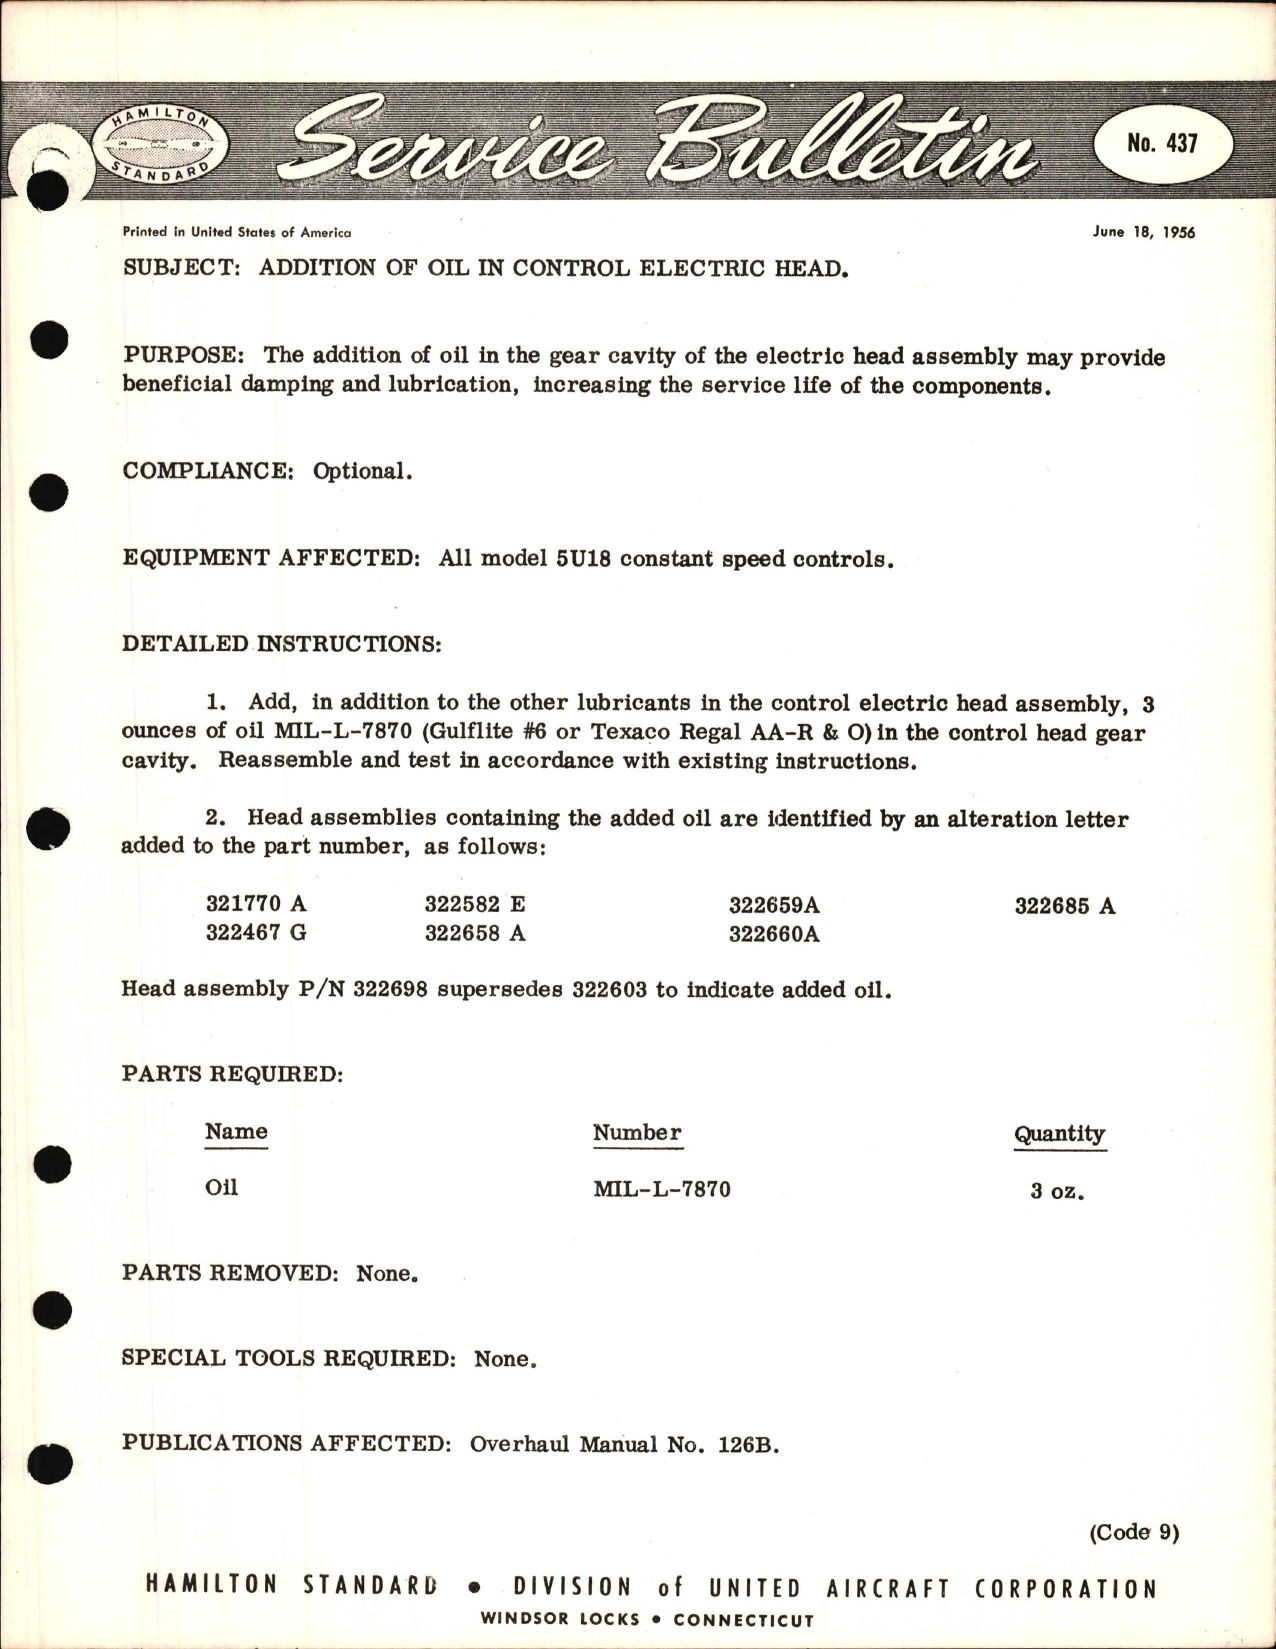 Sample page 1 from AirCorps Library document: Addition of Oil in Control Electric Head